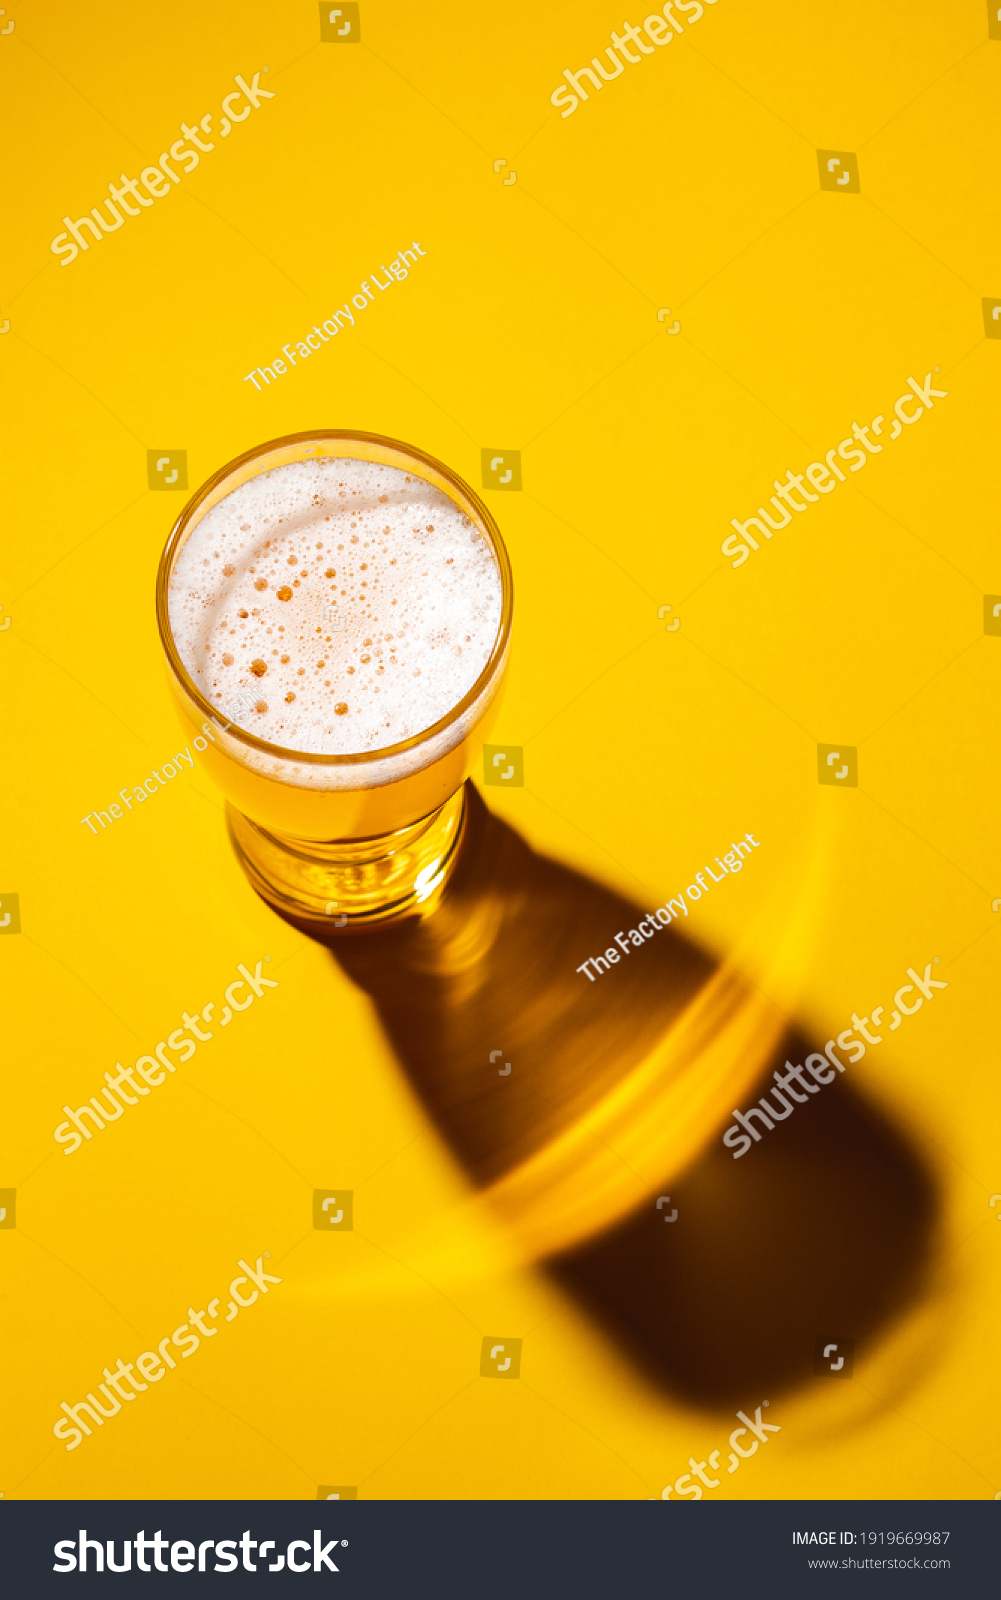 Glass of light beer on a yellow background, top view. Shadow from a glass of lager.  #1919669987